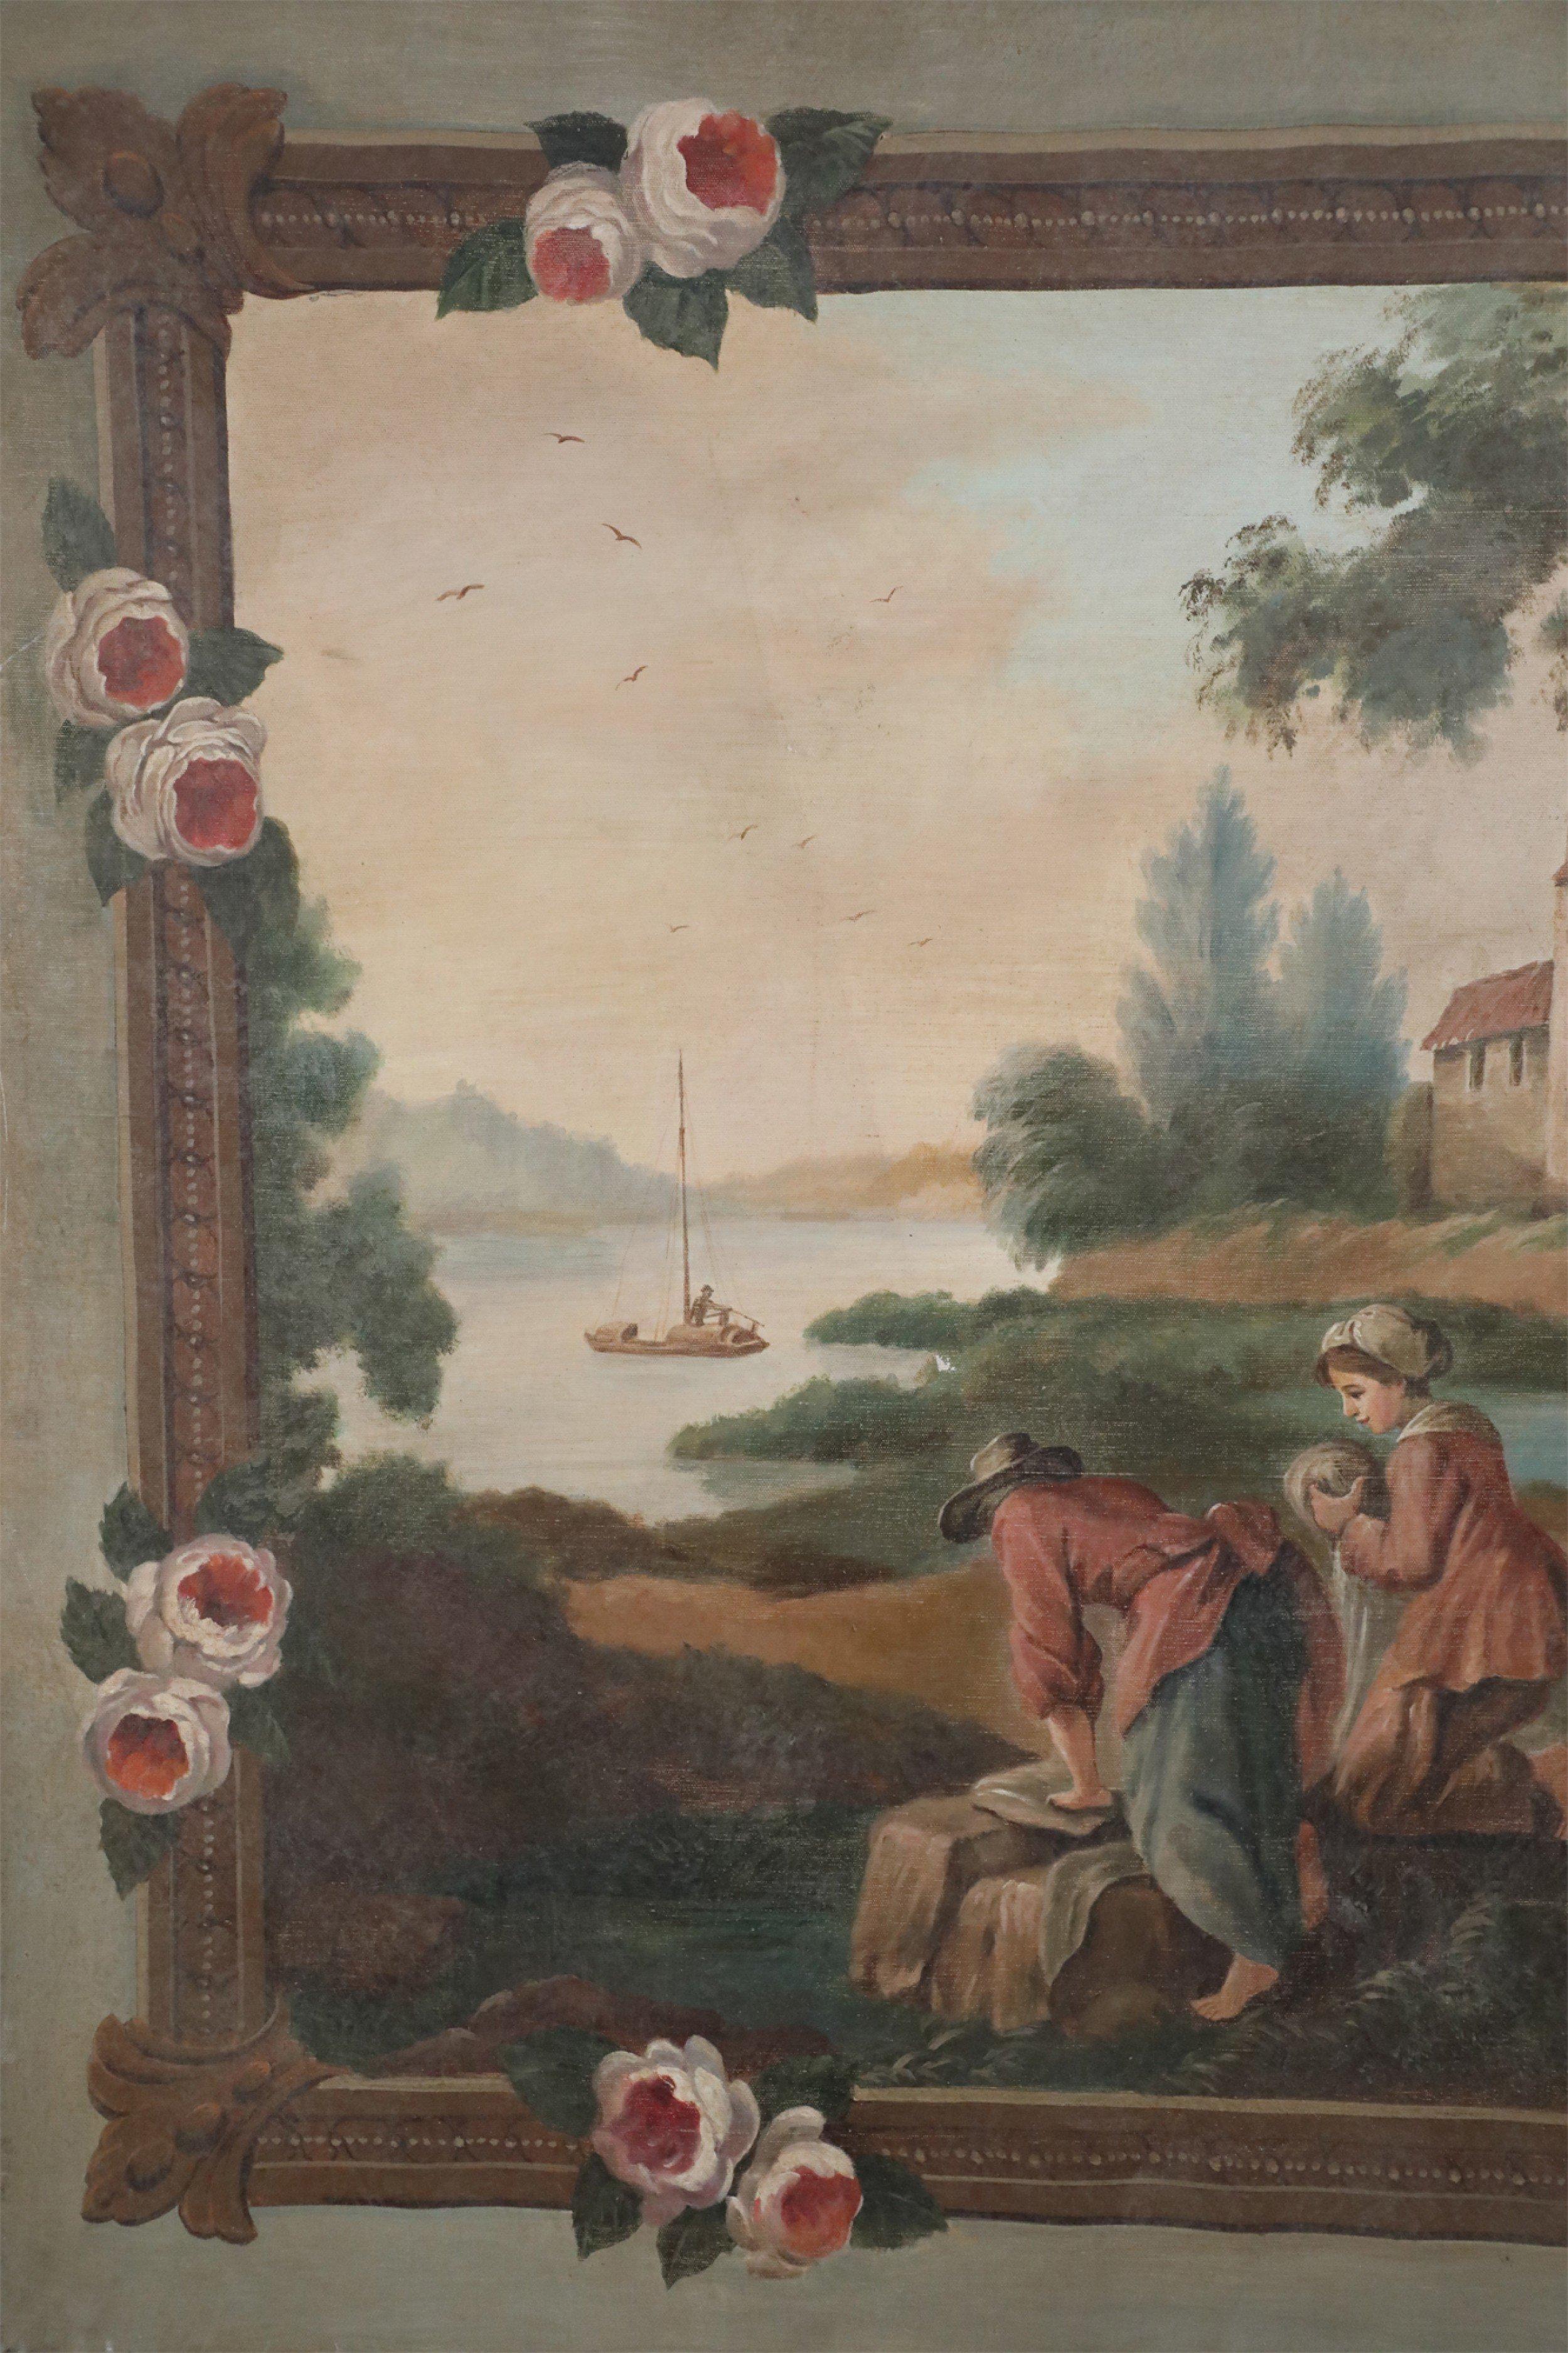 Vintage (20th Century) genre painting depicting two figures working outdoors in front of a lake with a sailboat, and red-roofed houses and green trees beyond the water, surrounded by a decorative floral border.
   